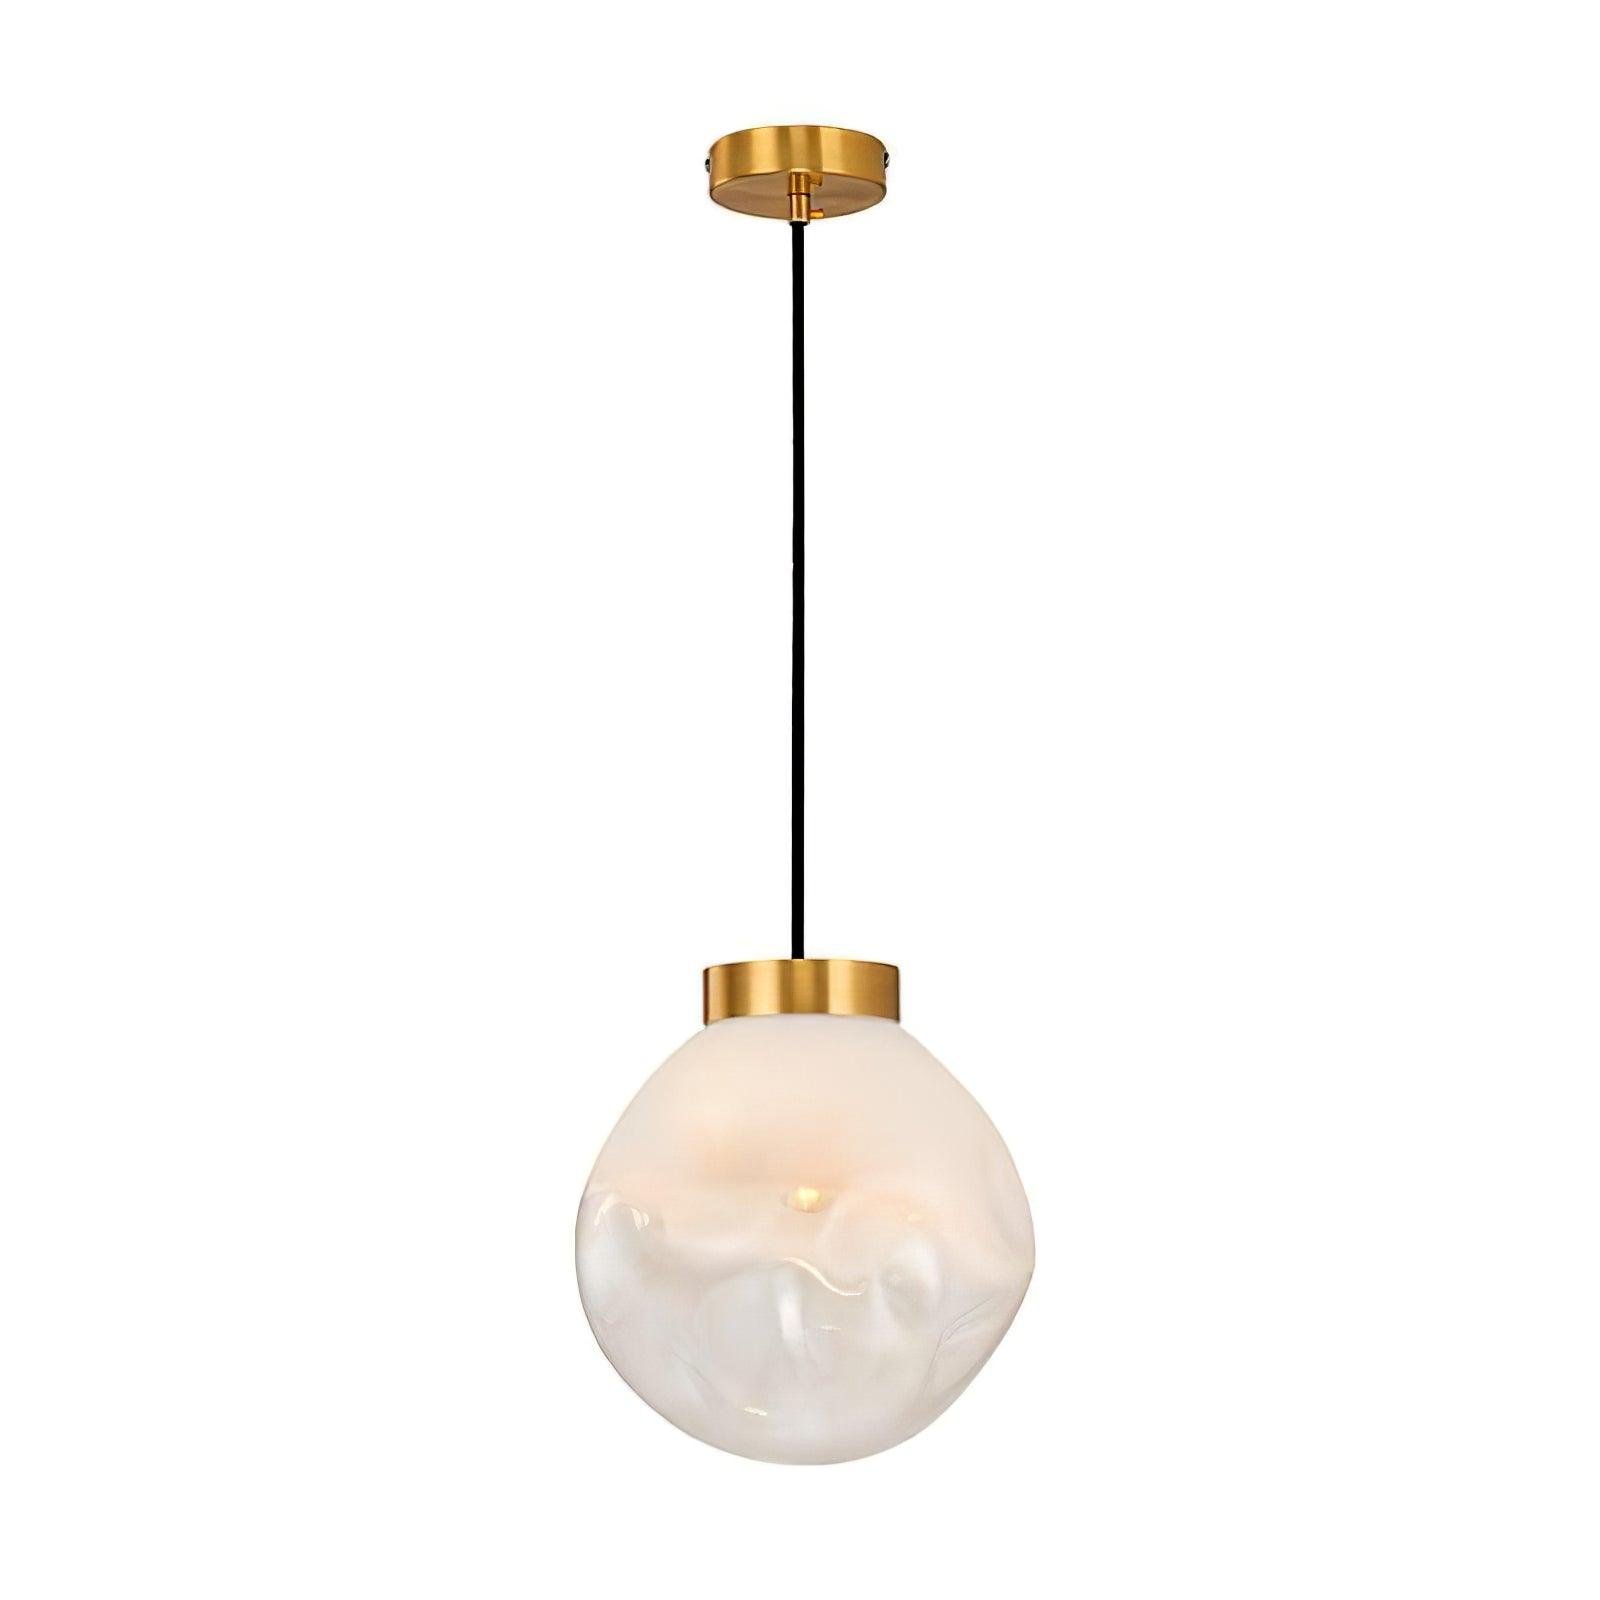 Gold Ecar Pendant Lamp with a Diameter of 9.8 inches and Height of 9.8 inches (25cm x 25cm)